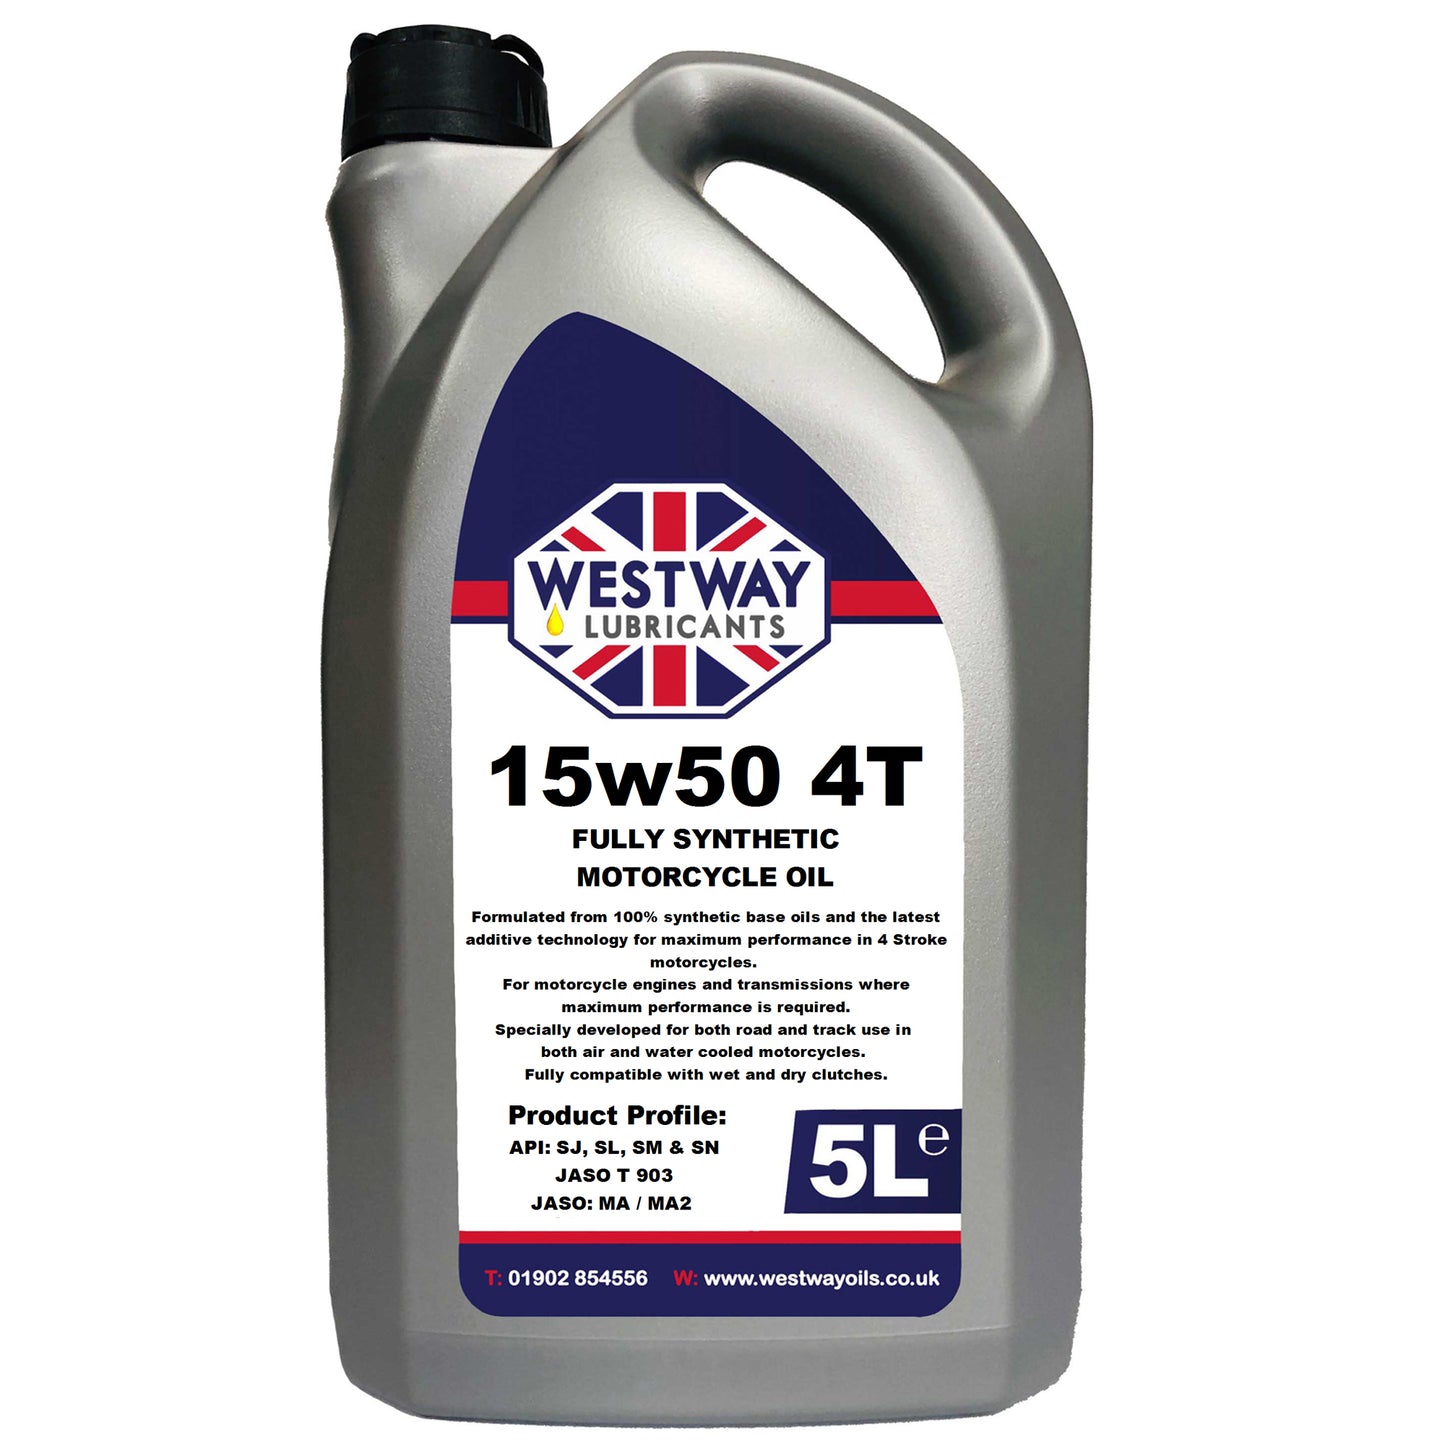 15w50 4T Fully Synthetic Motorcycle Oil